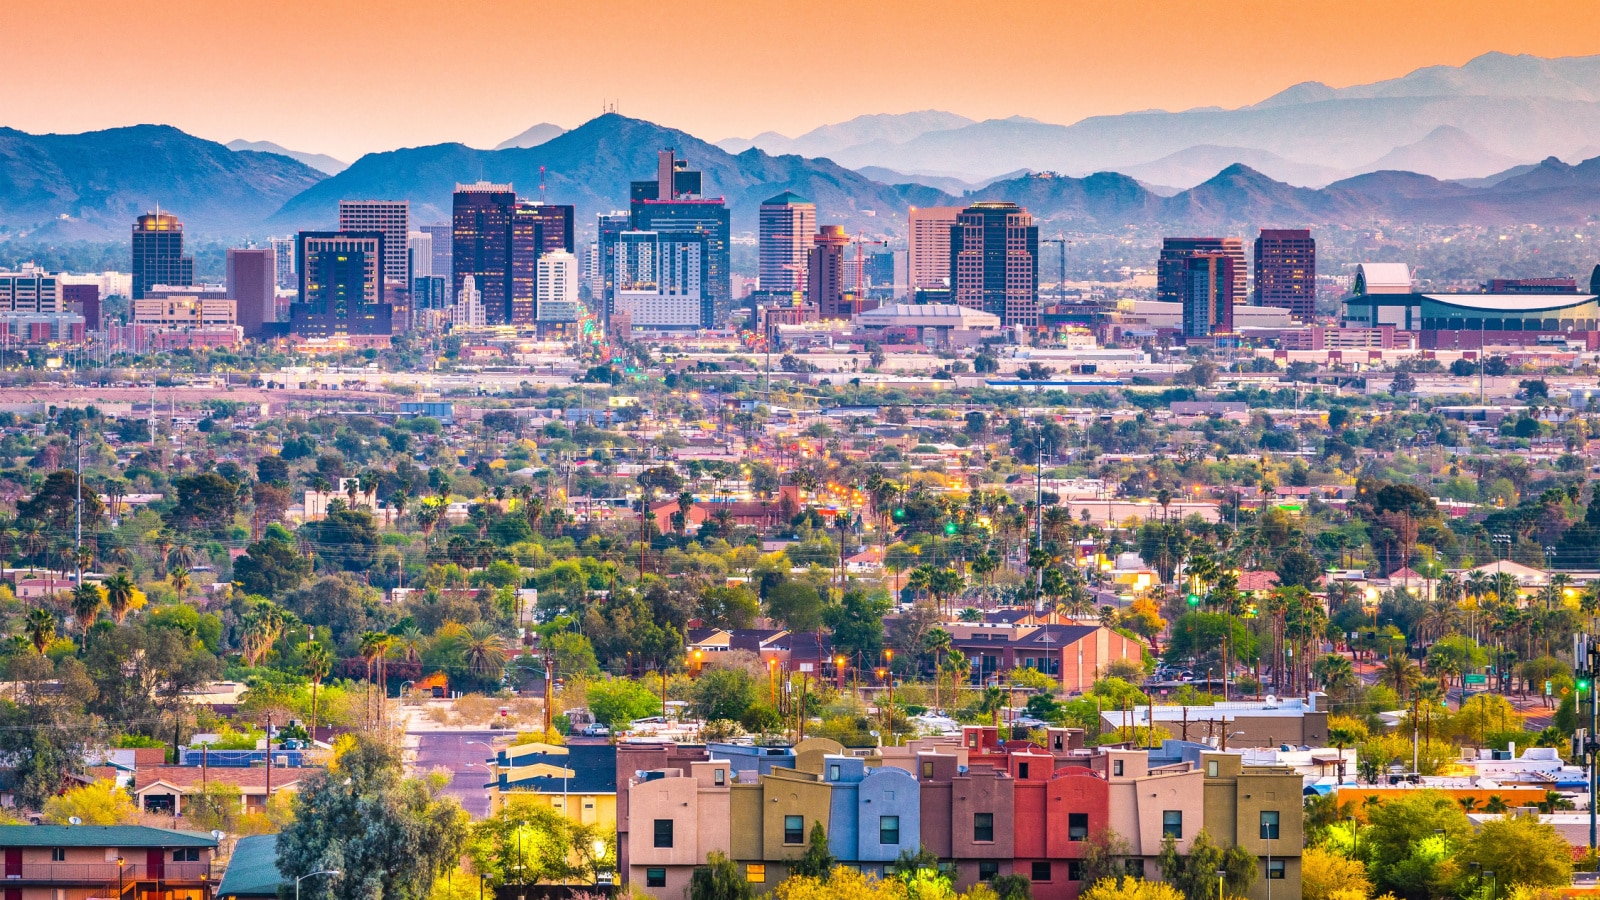 <p>Phoenix is located in the Salt River Valley of Arizona, surrounded by beautiful mountain ranges. With lots of annual sunshine and hot weather, it’s aptly named The Valley of the Sun. </p>